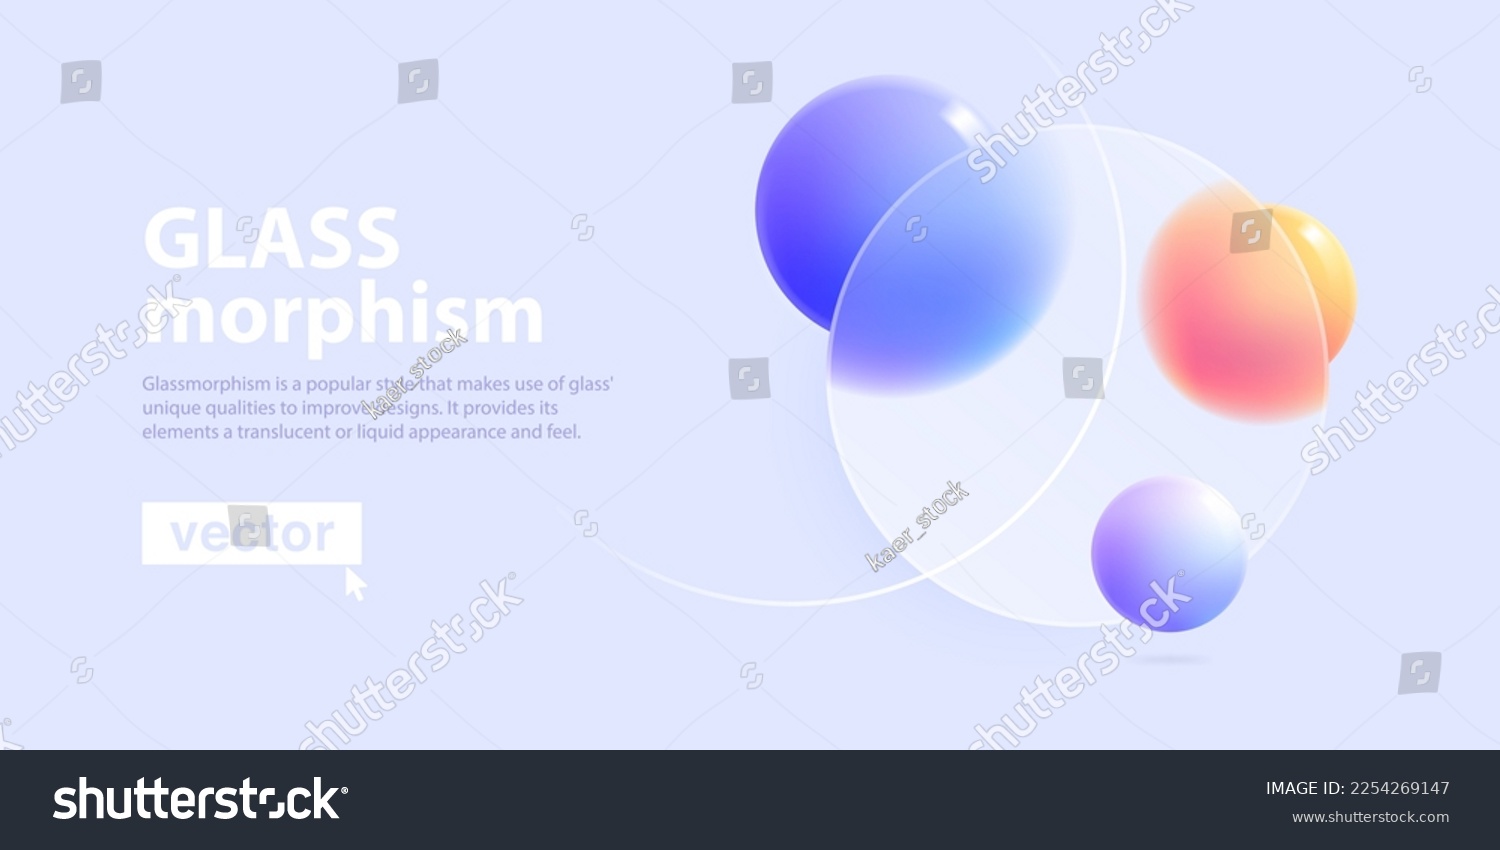 SVG of Abstract minimalistic background for presentation slide in glassmorphism style. Lilac colored 3d trendy and futuristic landing page template. Suitable for technology or business corporate homepage. svg